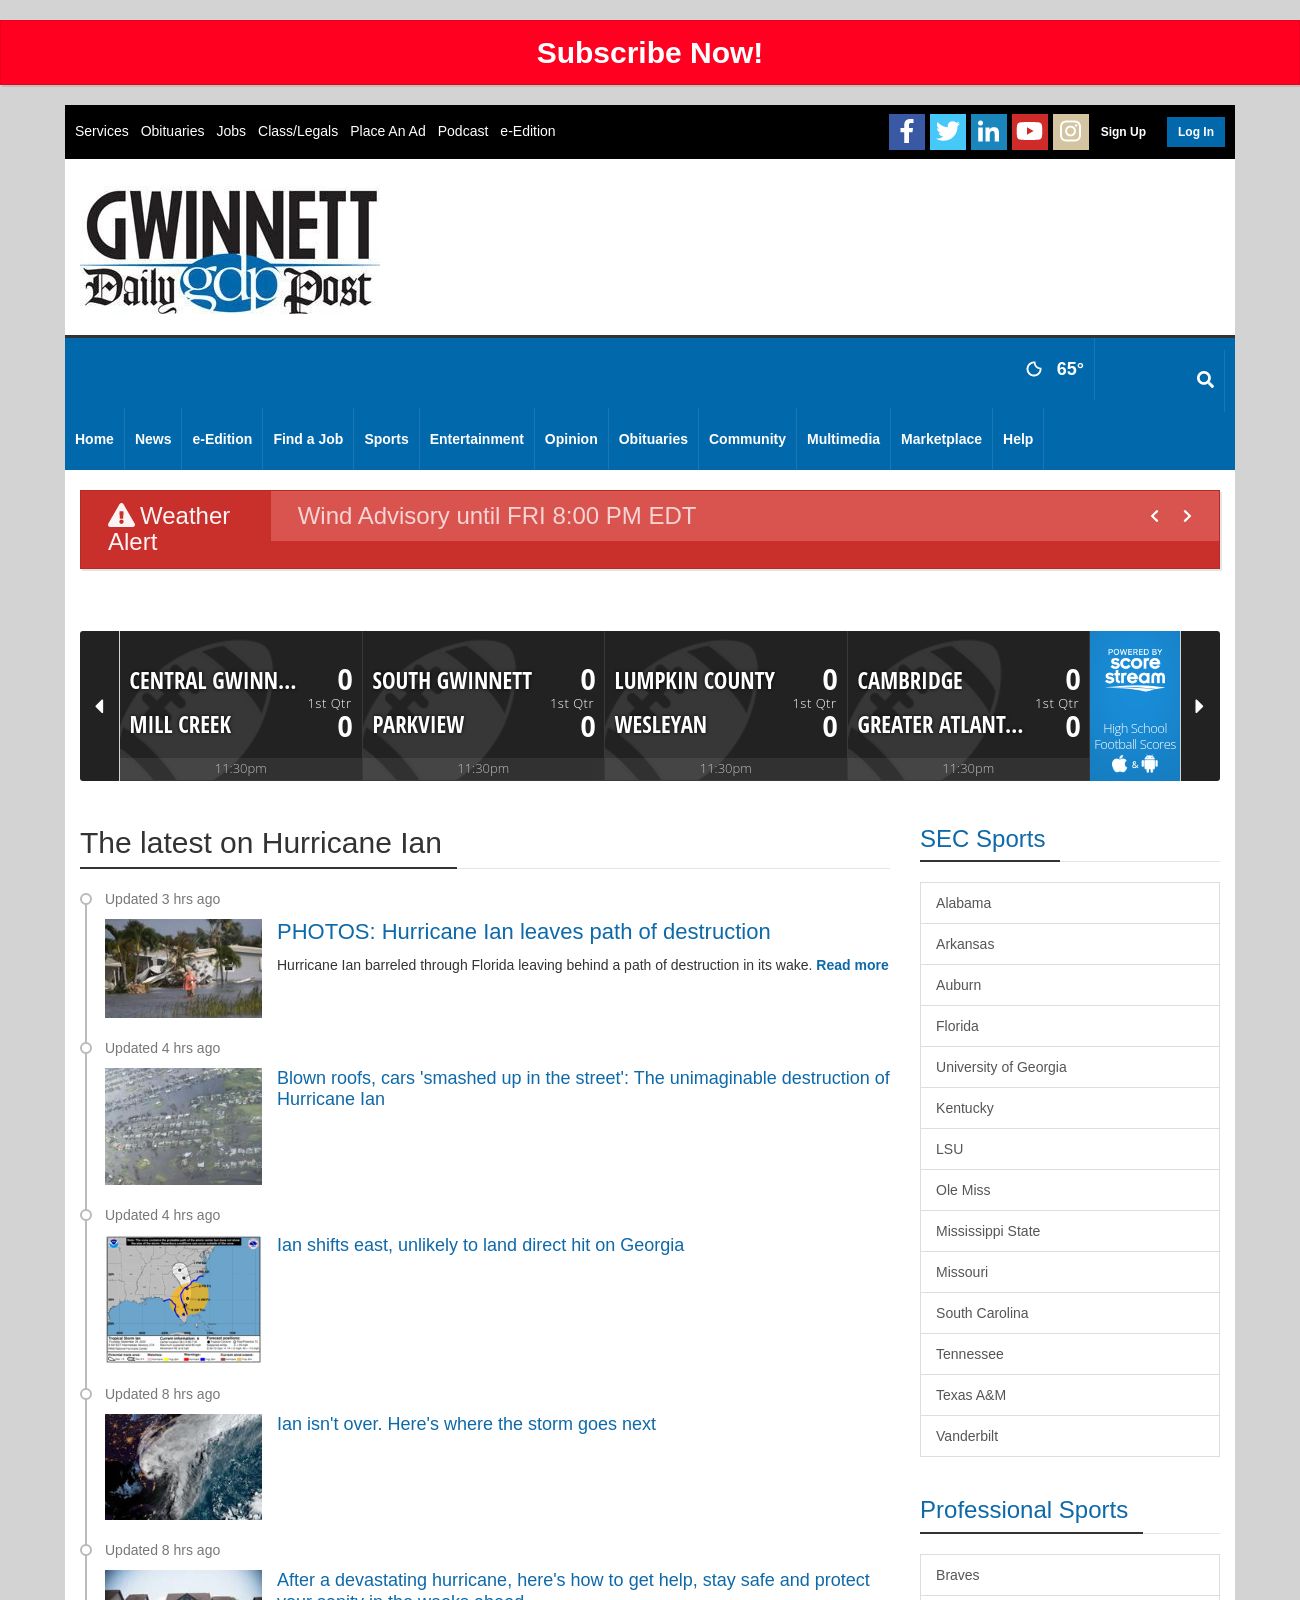 Gwinnett Daily Post at 2022-09-29 20:01:58-04:00 local time